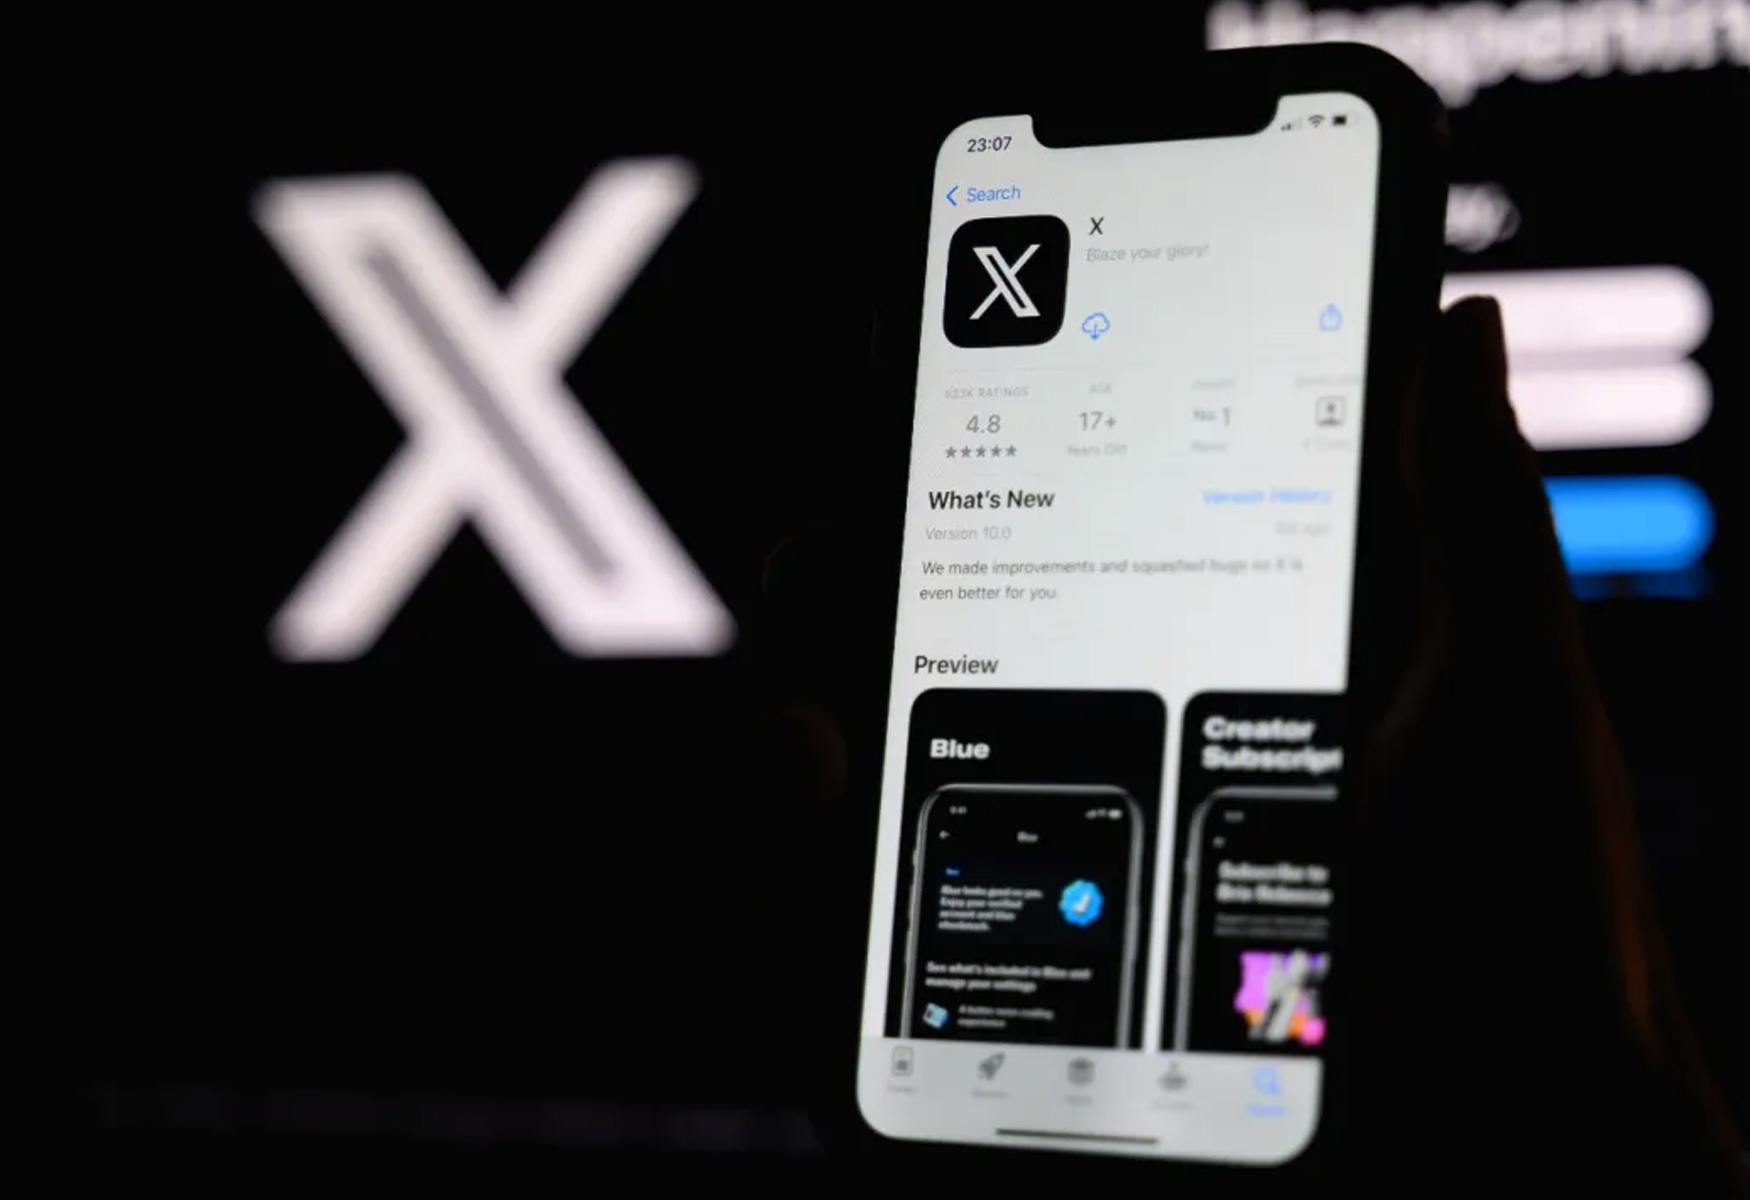 x-now-allows-users-to-broadcast-community-posts-to-all-followers